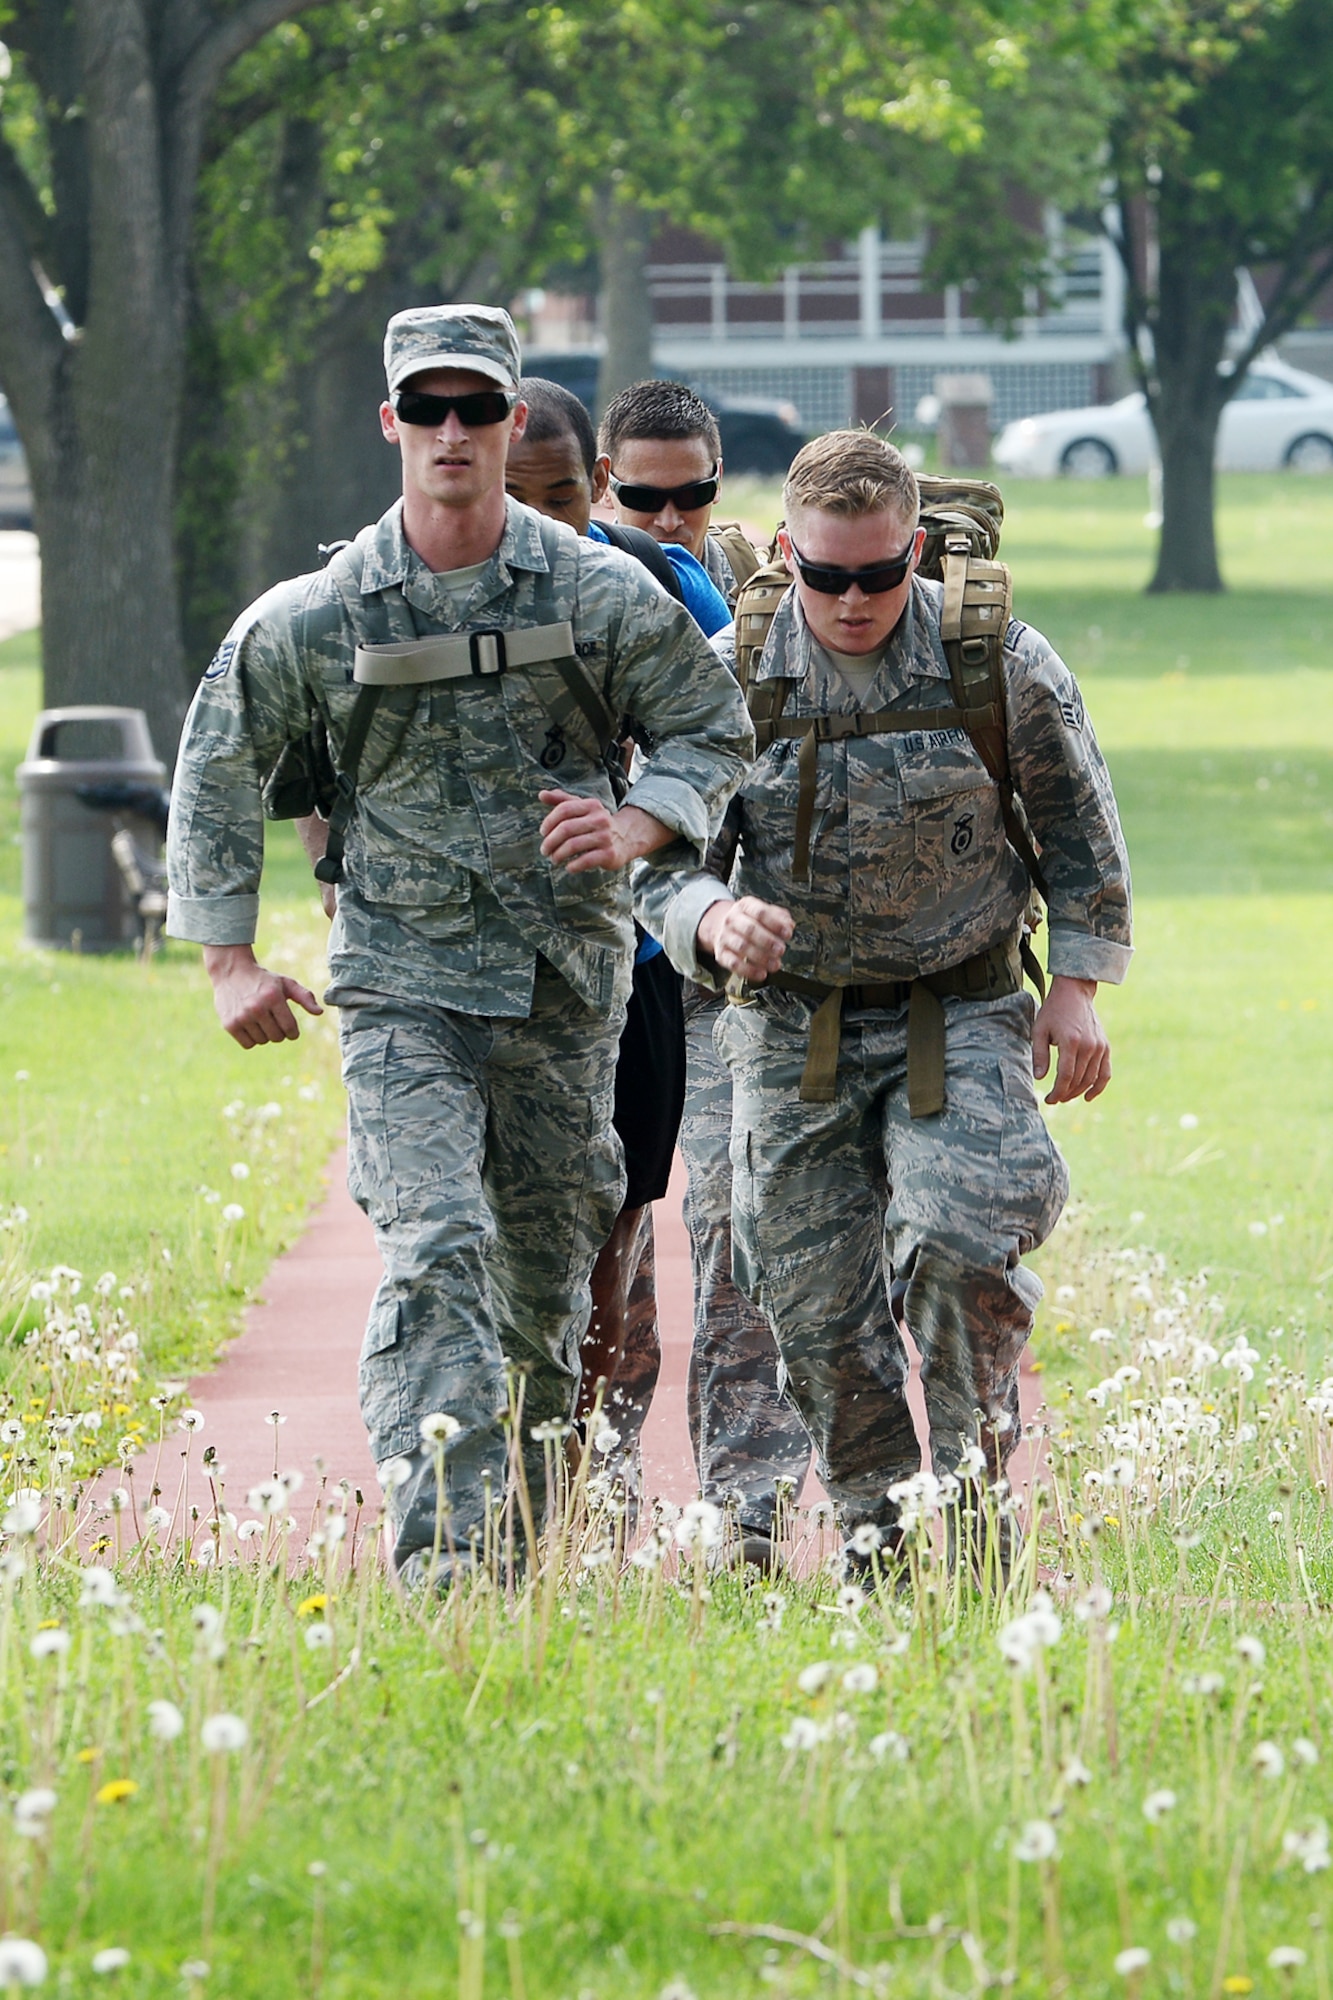 55th Security Forces Squadron Airmen take part in a ruck march challenge May 14, 2018, at Offutt Air Force Base, Nebraska. Offutt’s defenders participated in local events as well as coordinating base events to recognize the contributions of police across the nation. (U.S. Air Force photo by Charles J. Haymond)